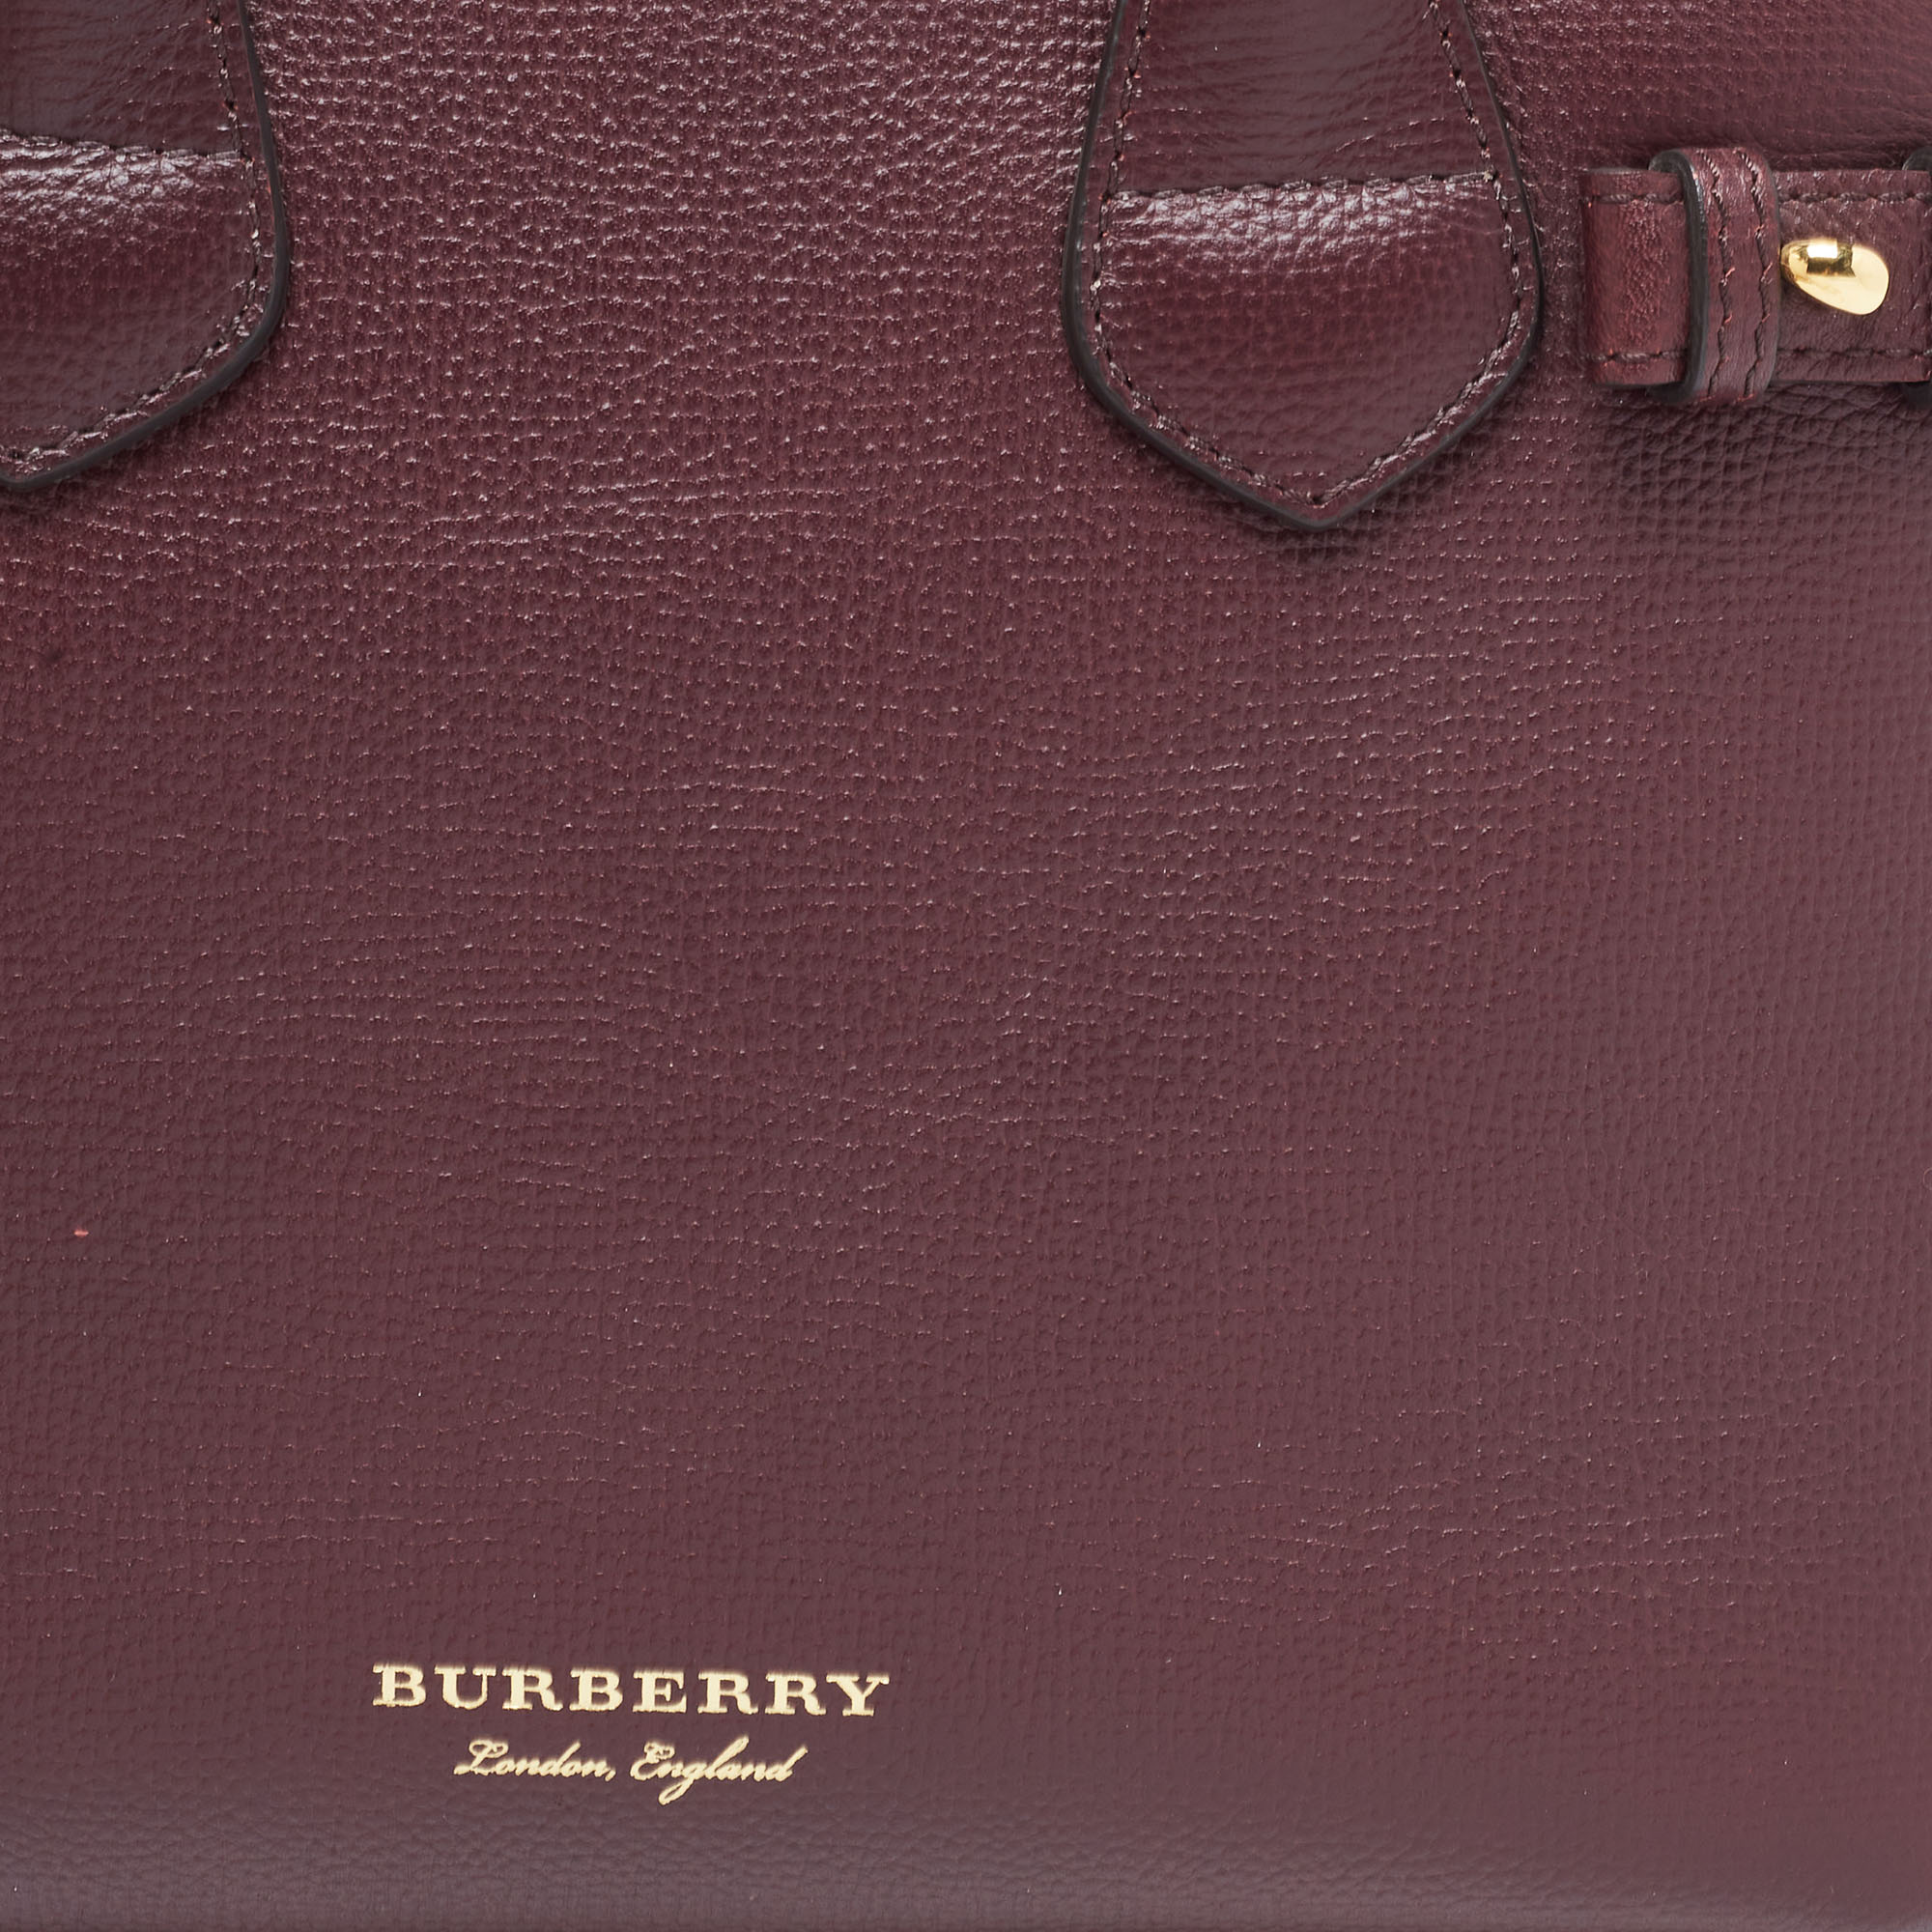 Burberry Burgundy/Beige Leather And House Check Fabric Small Banner Tote